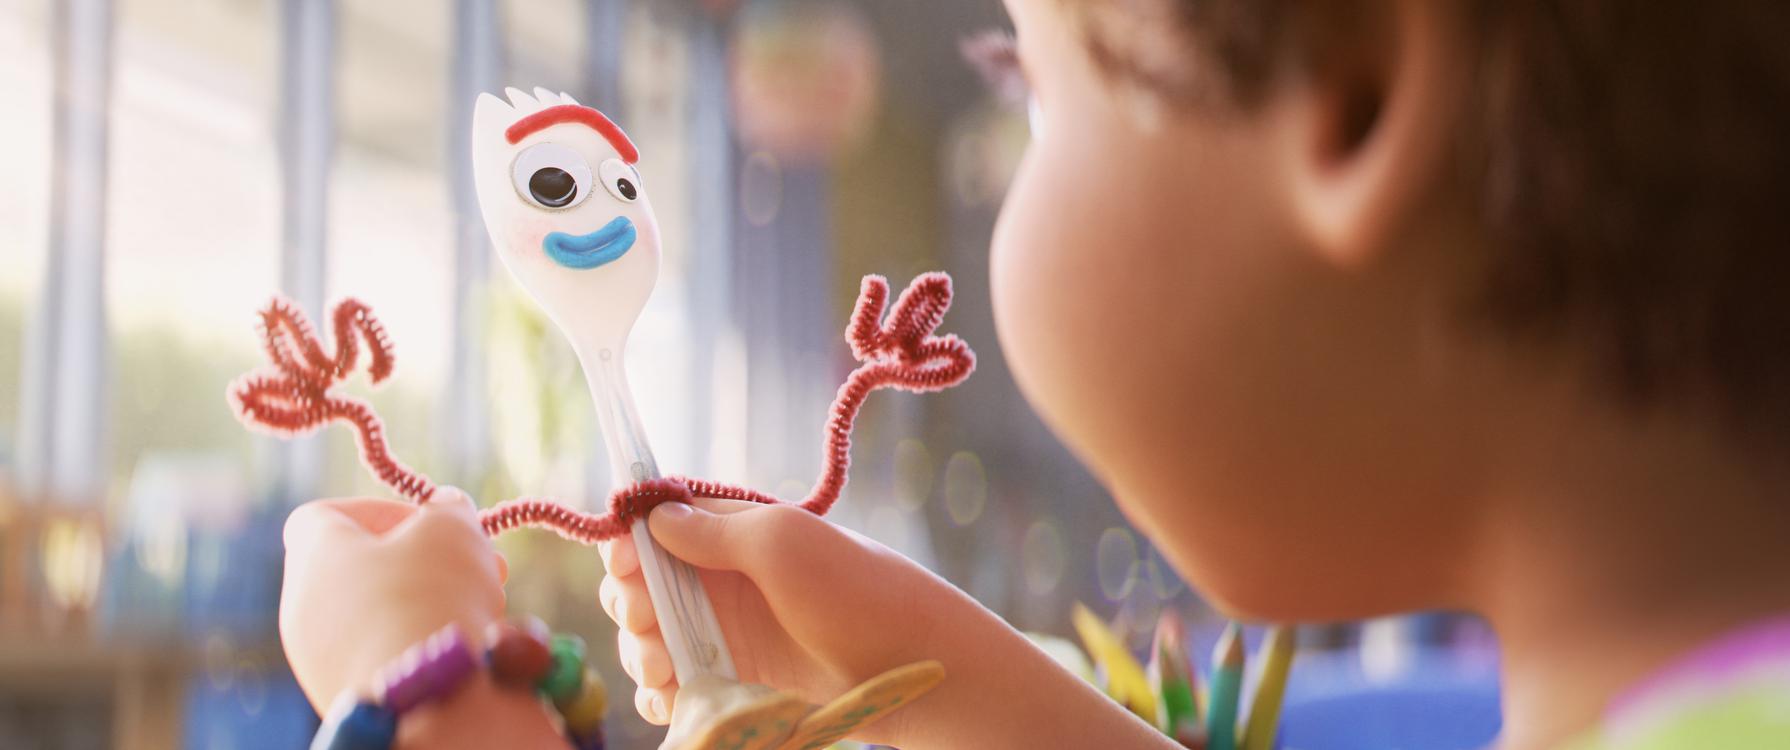 Toy-Story-4-OV- st 5 jpg sd-low ©2019-Disney-Pixar-All-Rights-Reserved